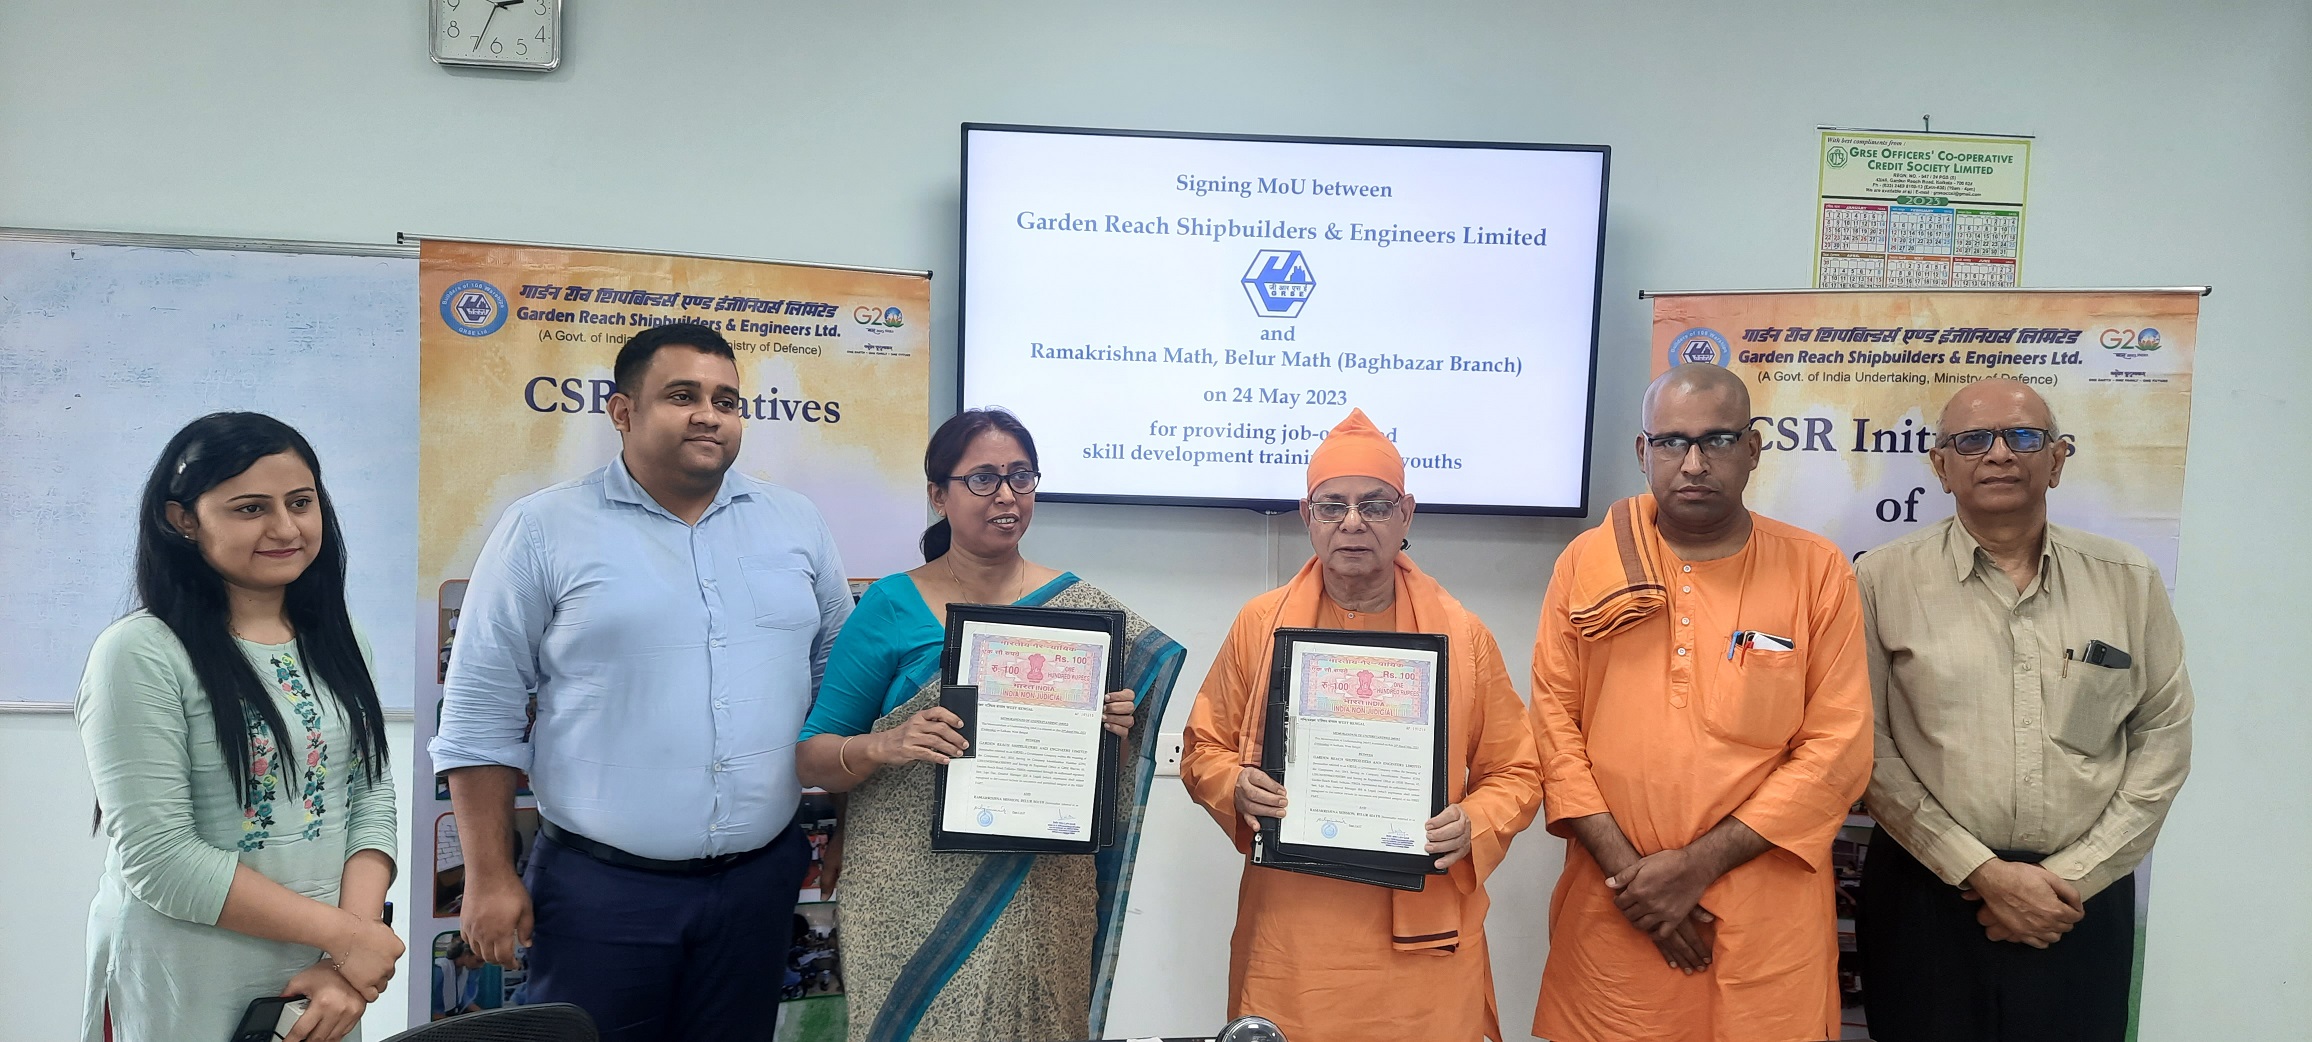 GRSE signed MOU with Ramkrishna Math, Baghbazar for providing Job-Oriented Skill Development Vocational Training to youths at Ma Sarada Swanirvar Kendra, Chitpur on 24 May 23